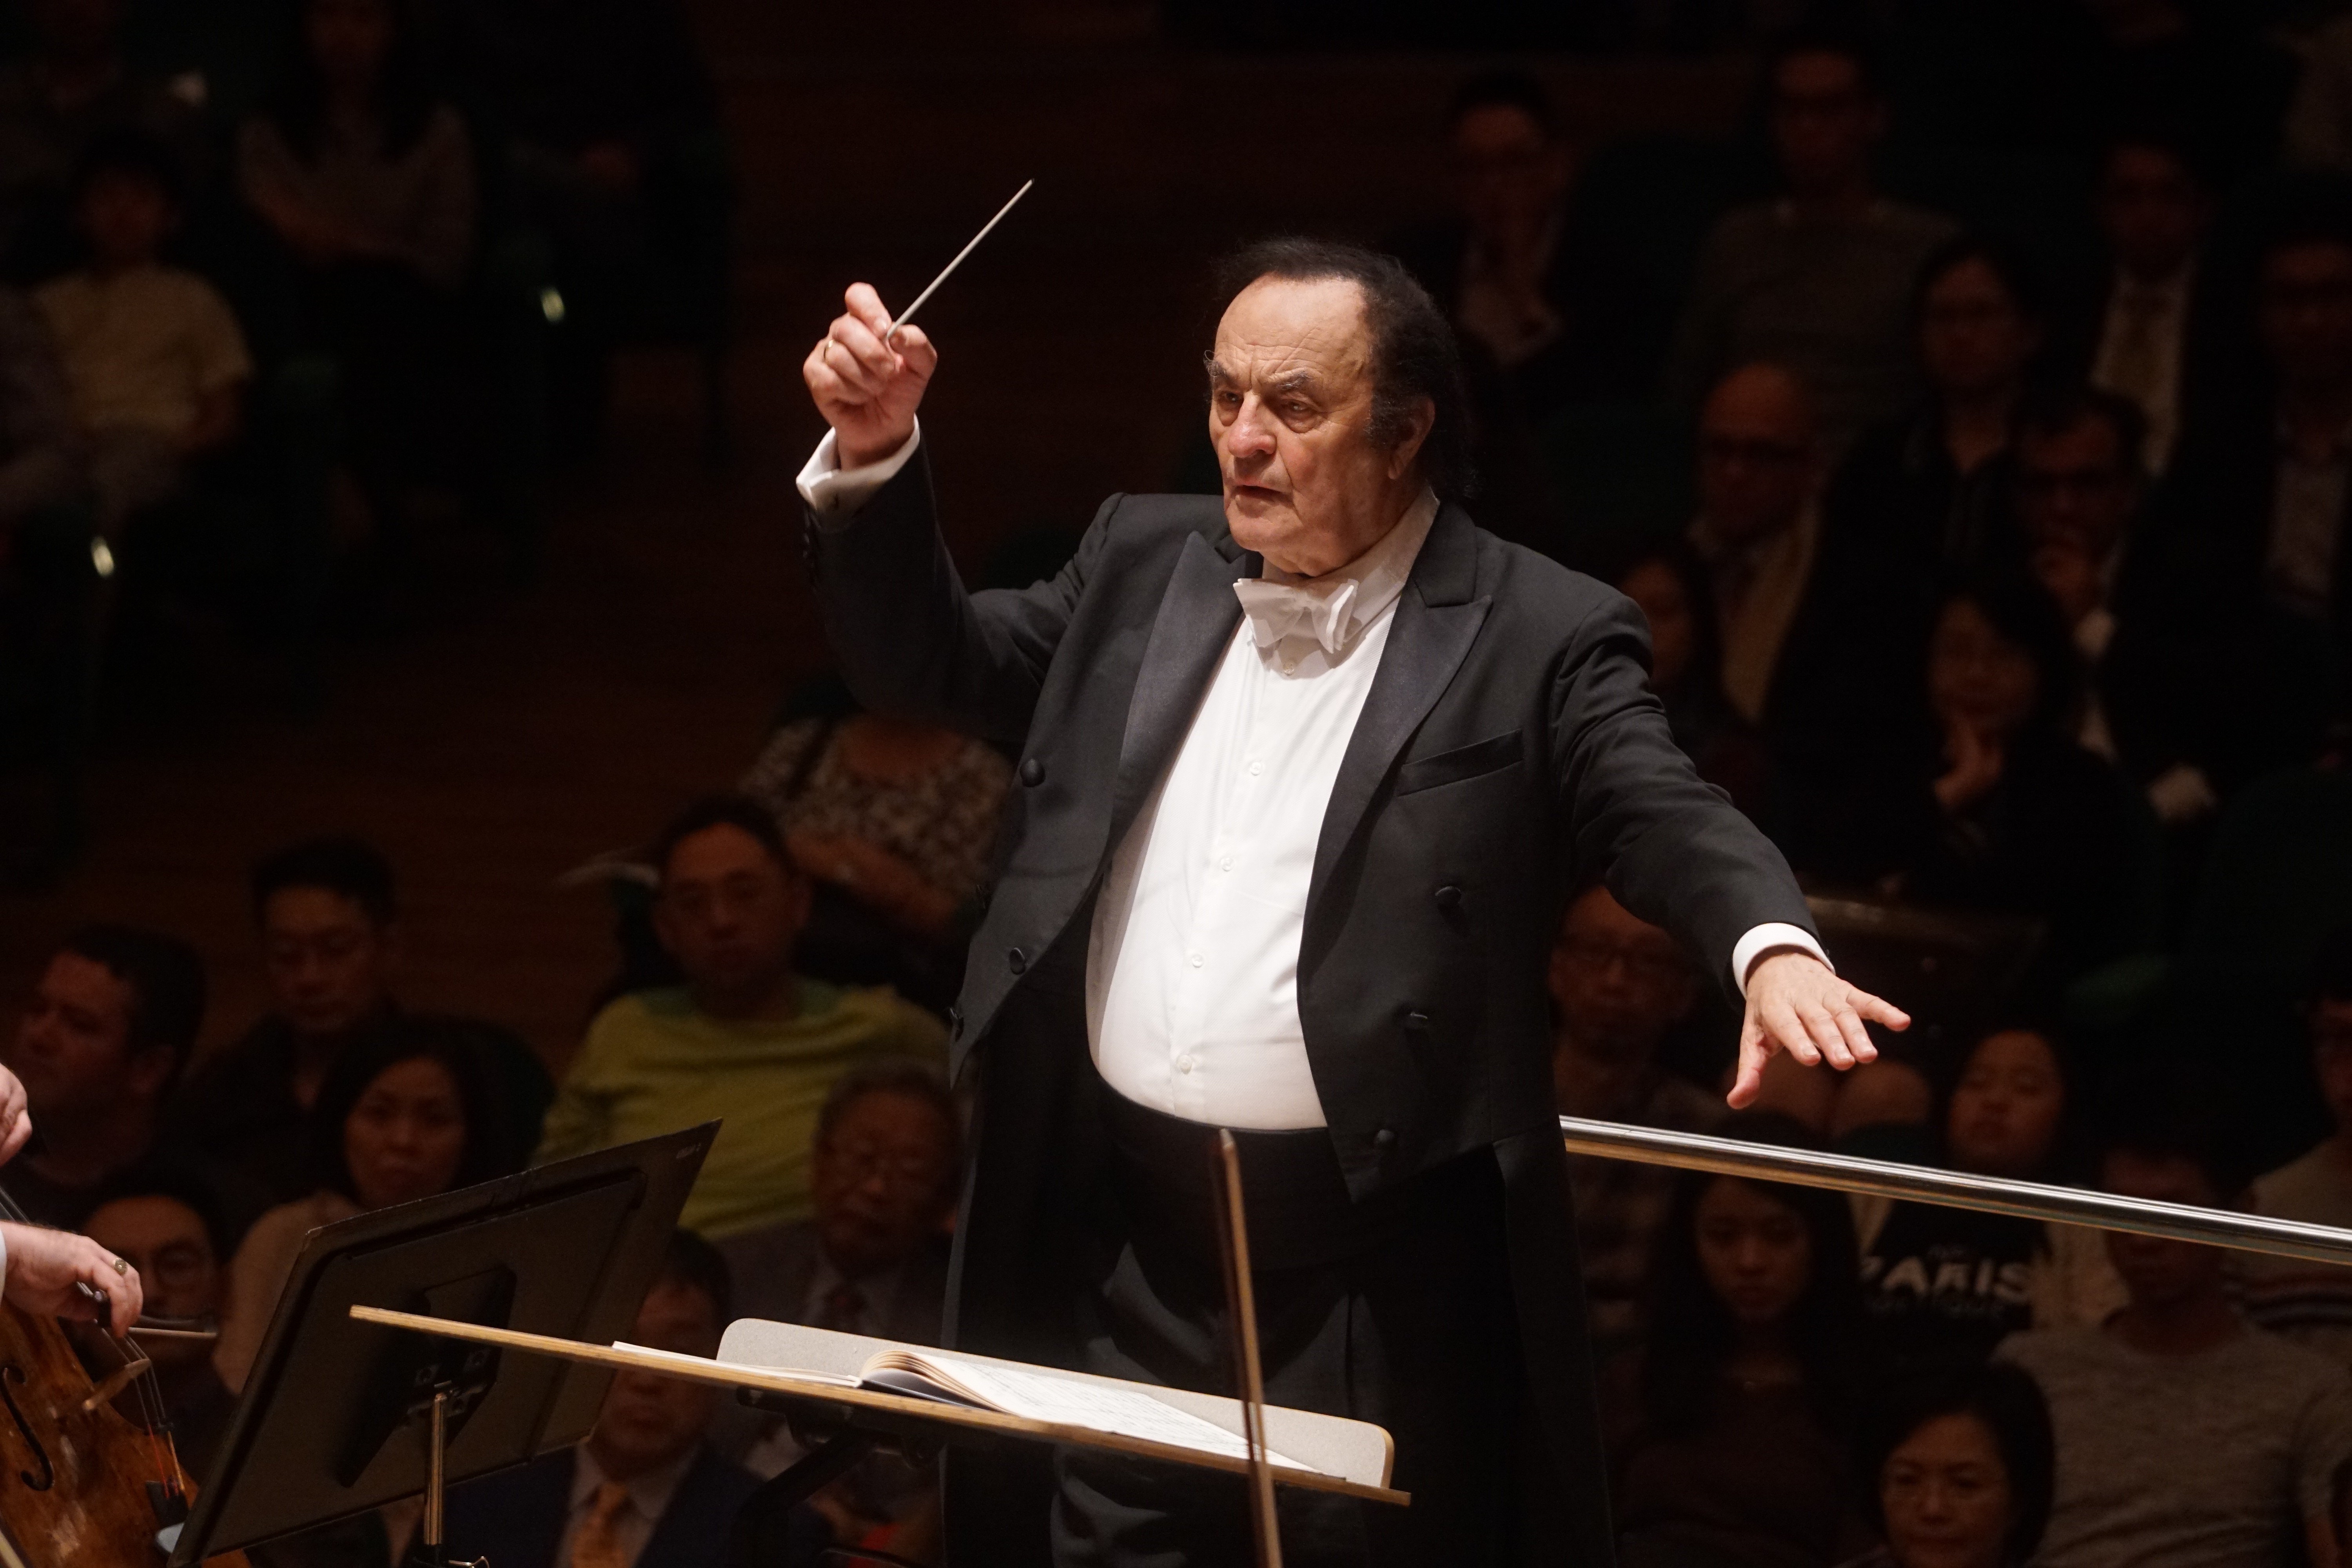 Controlled brilliance characterised Russian pianist’s performance of Rachmaninov’s Piano Concerto No 3 and HK Phil under Swiss maestro’s baton